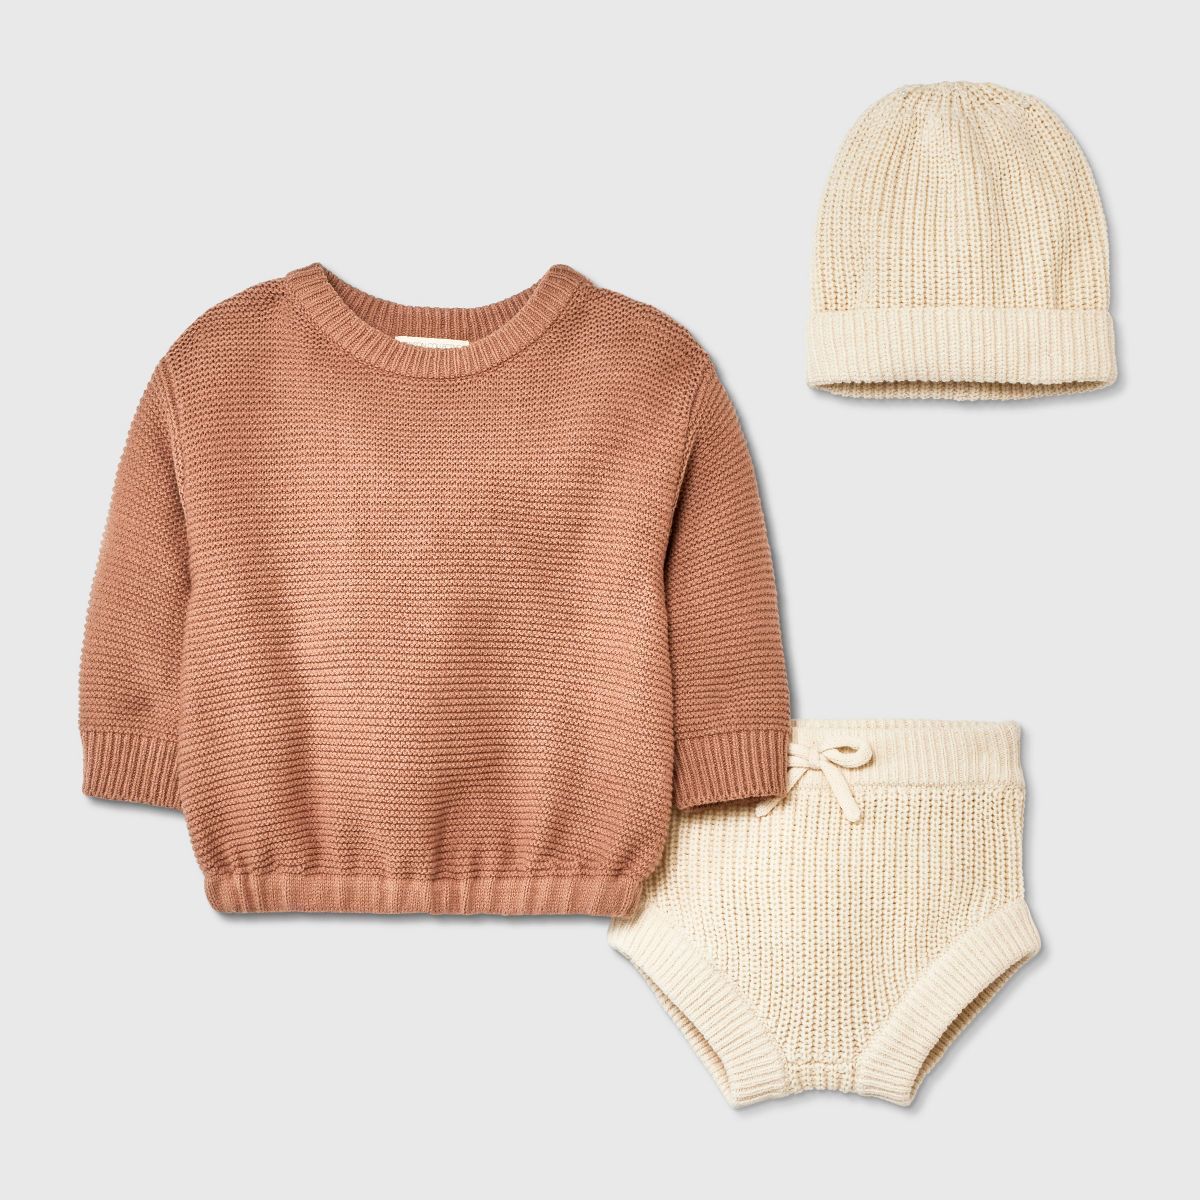 Grayson Collective Baby Beanie & Sweater Set - Cream/Brown | Target